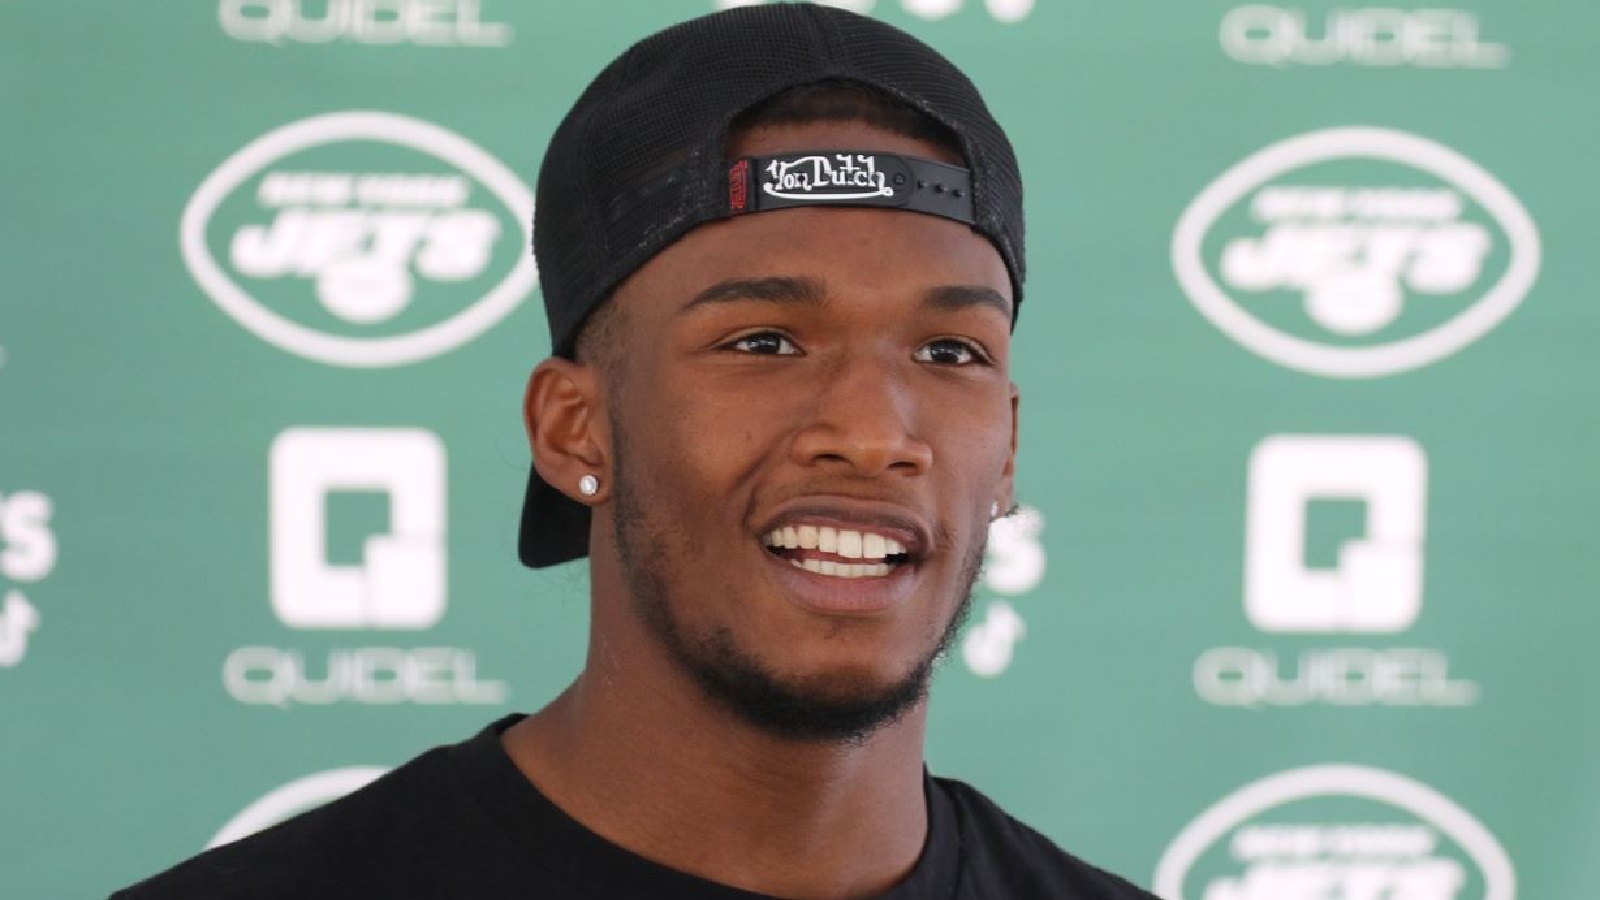 Jets' Rookie WR Garrett Wilson: 'I Want to Be Great'